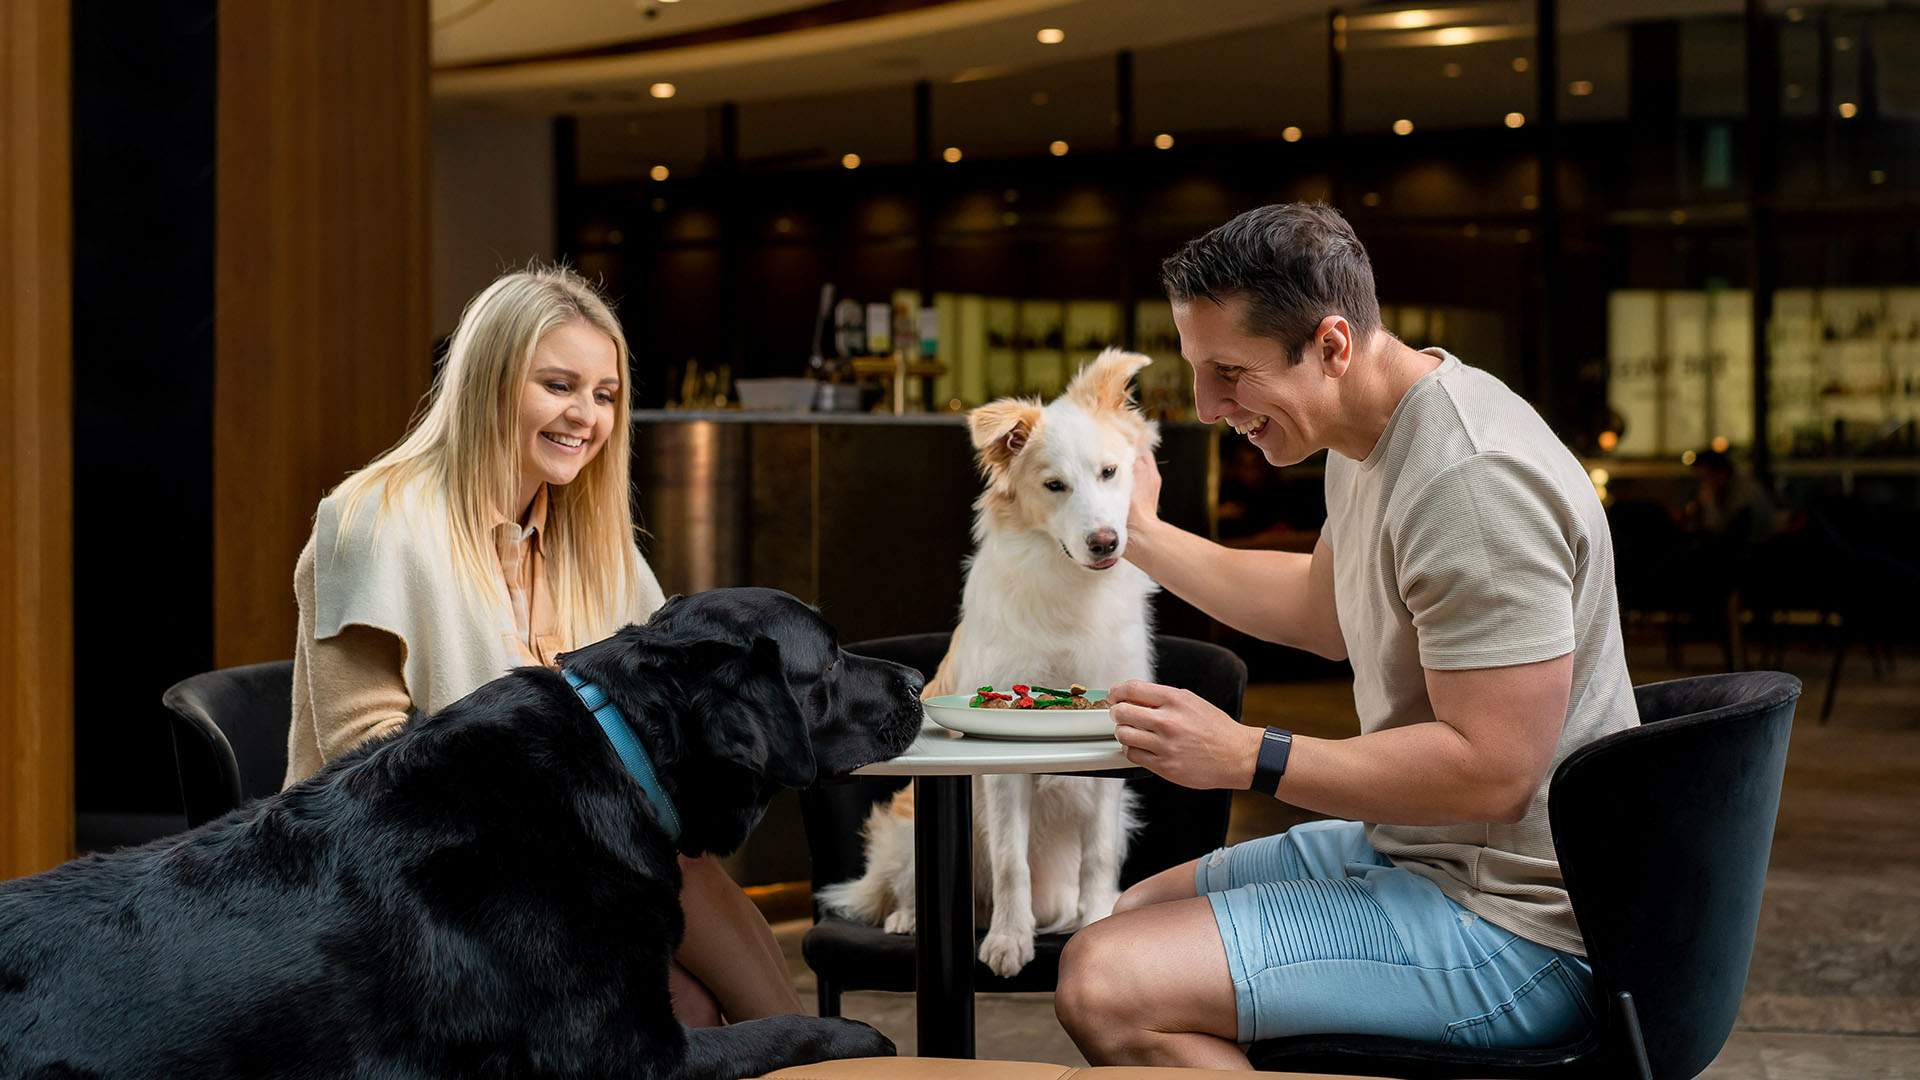 The Best Dog-Friendly Hotels, B&Bs and Self-Contained Getaways in Queensland